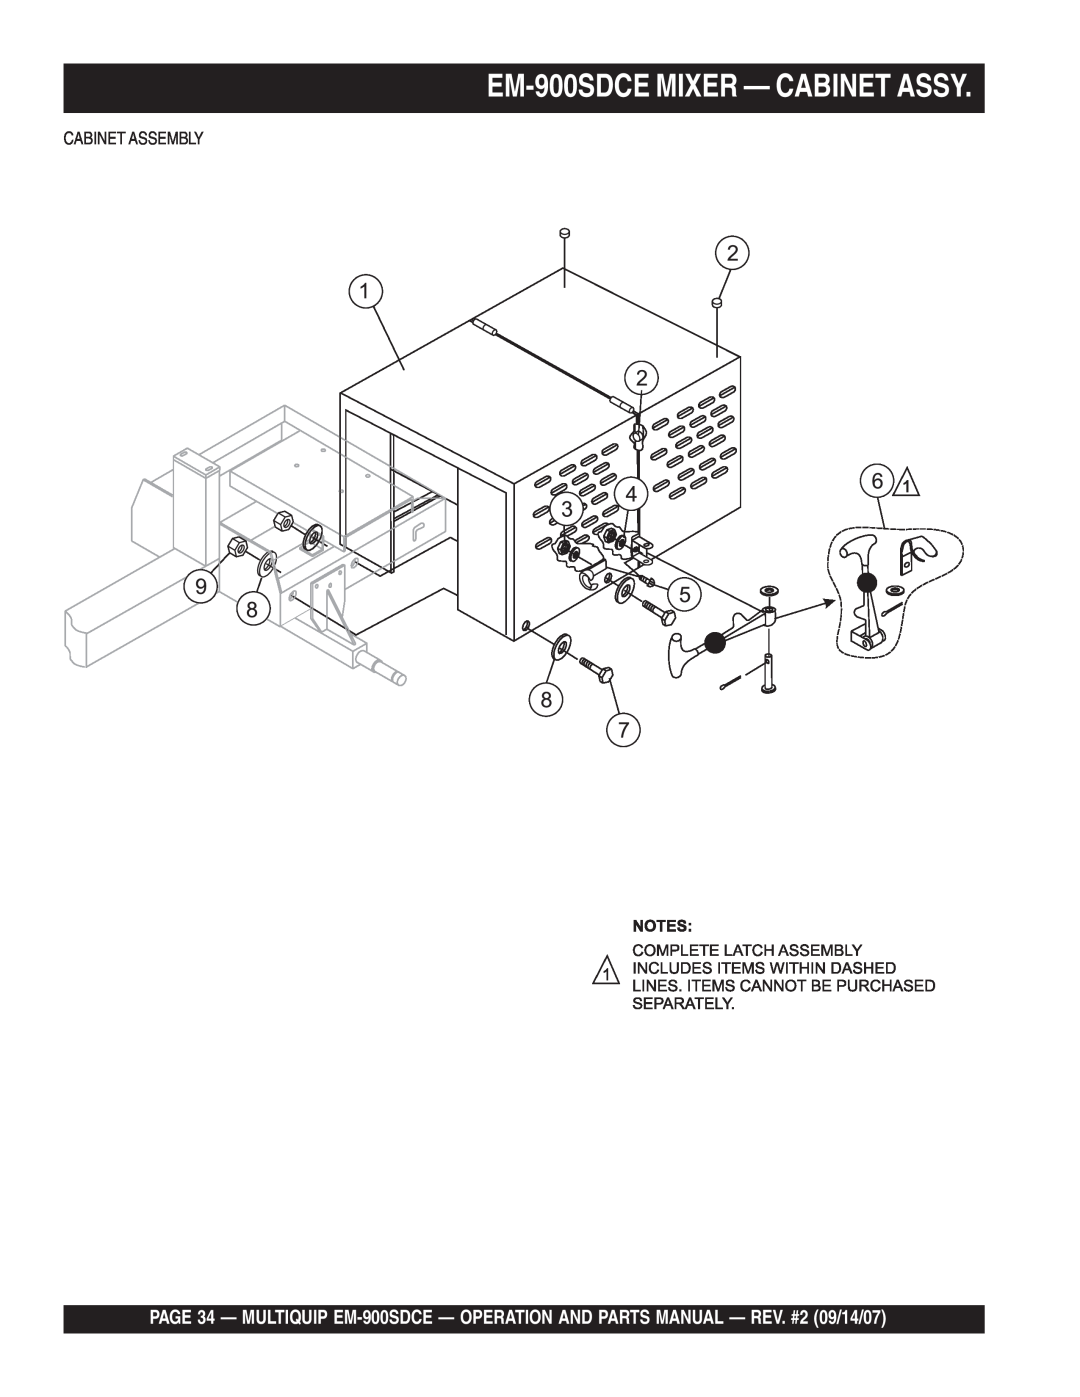 Multiquip manual EM-900SDCEMIXER — CABINET ASSY, Cabinet Assembly 